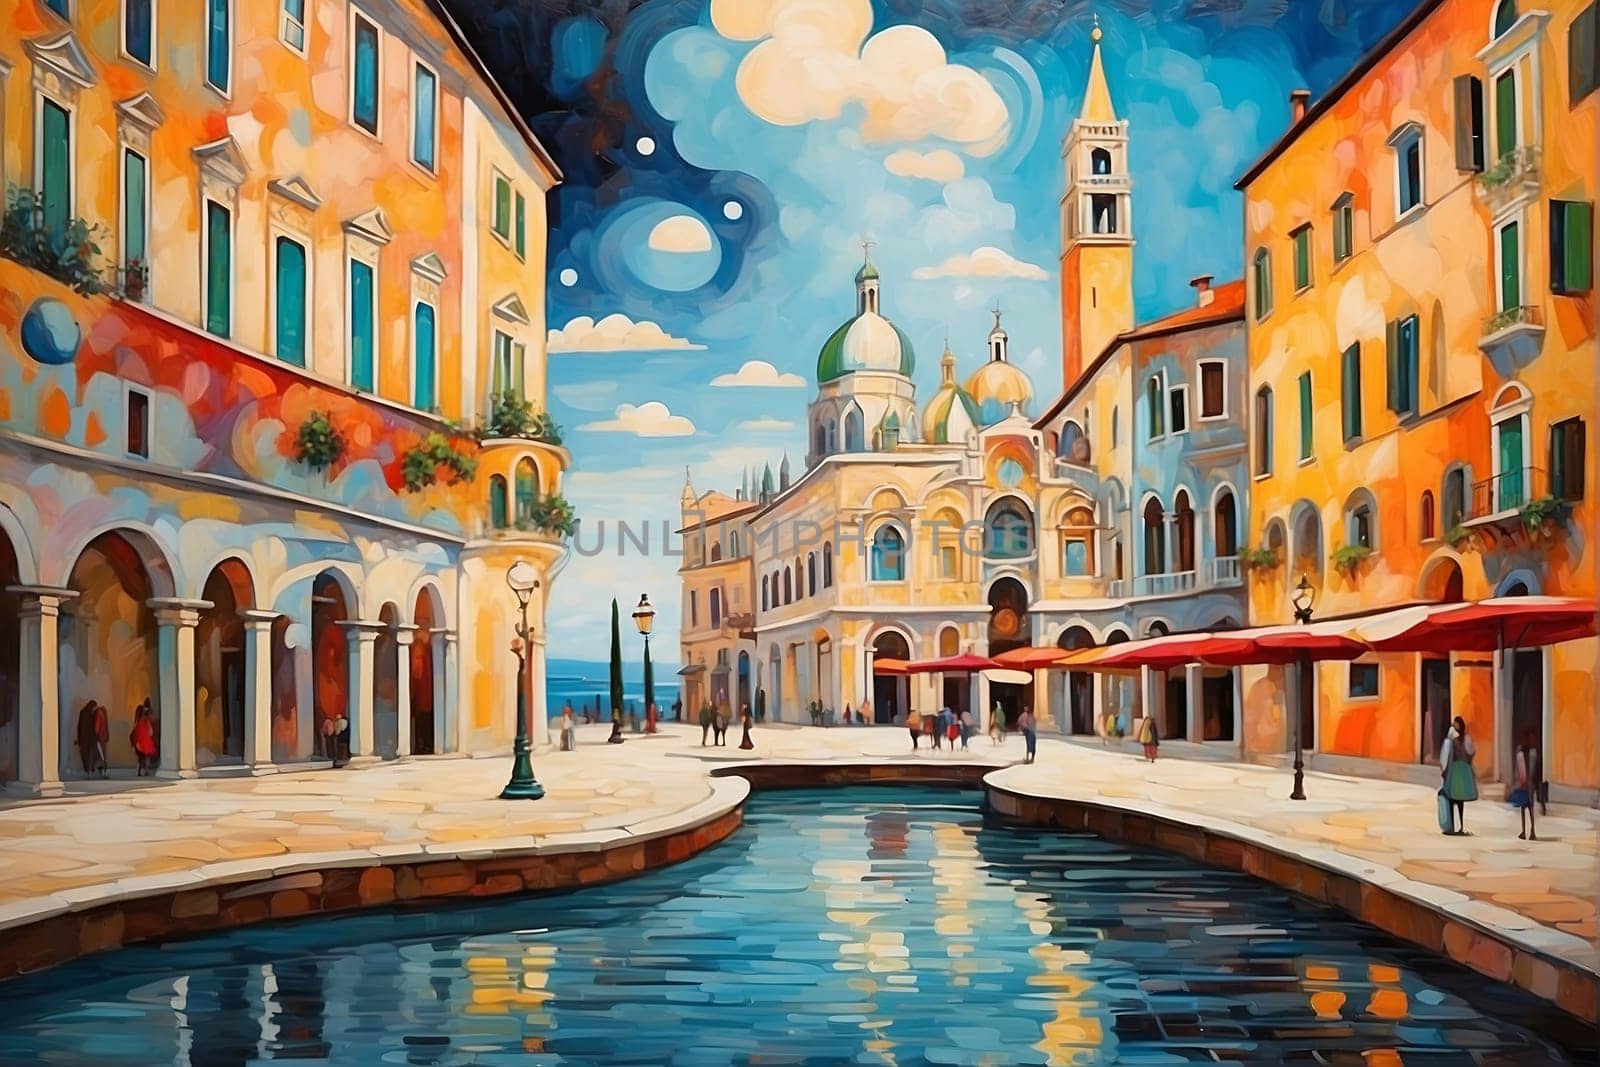 This painting depicts a cityscape with a prominent river flowing through it, showcasing the urban environment and water feature.